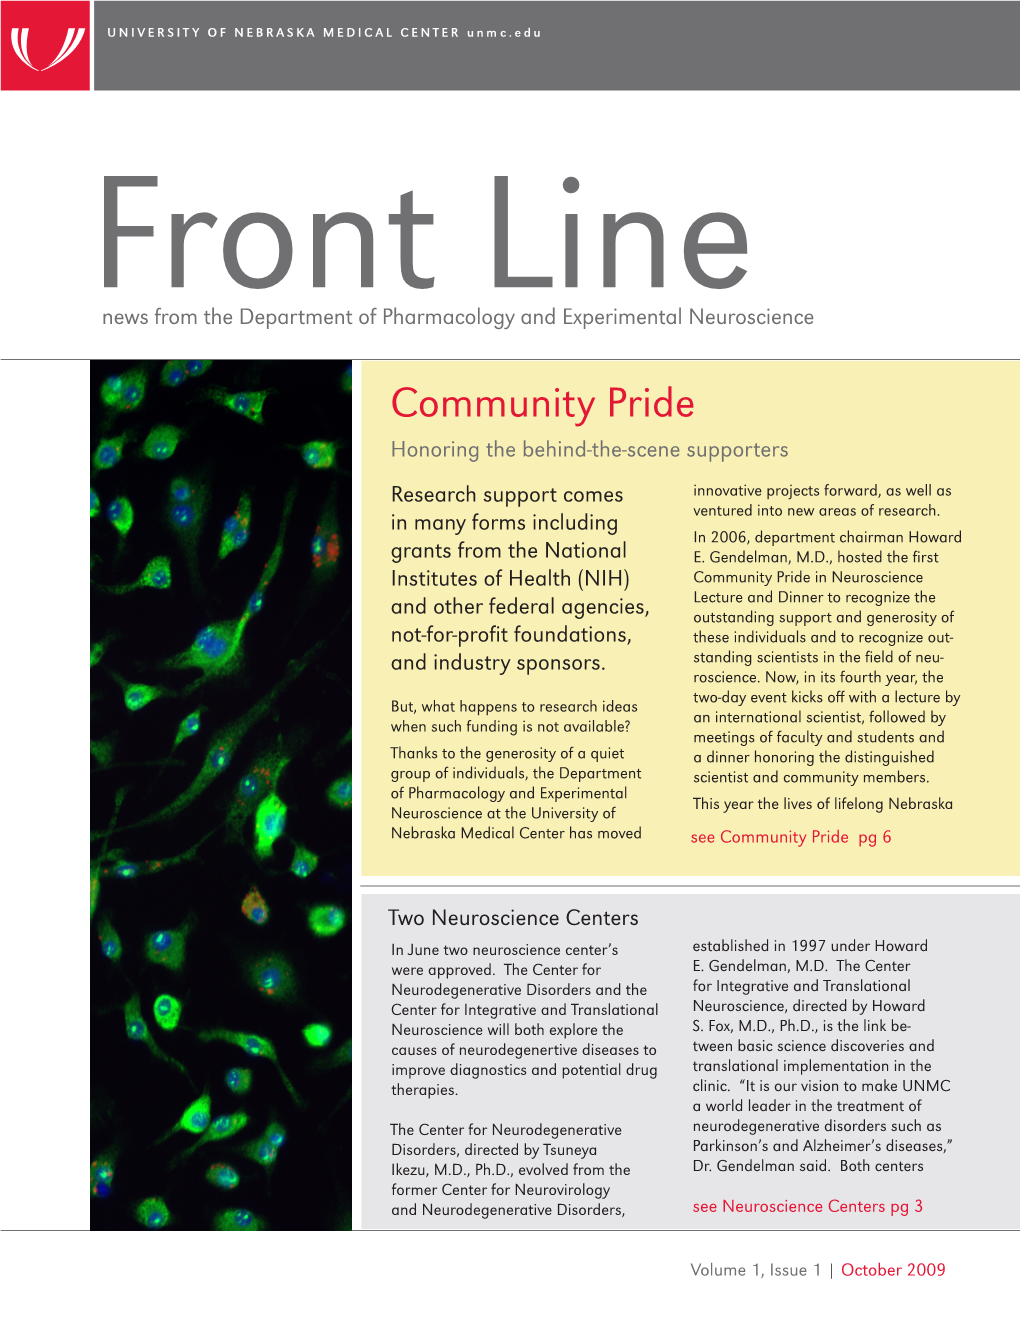 Community Pride Honoring the Behind-The-Scene Supporters Research Support Comes Innovative Projects Forward, As Well As Ventured Into New Areas of Research